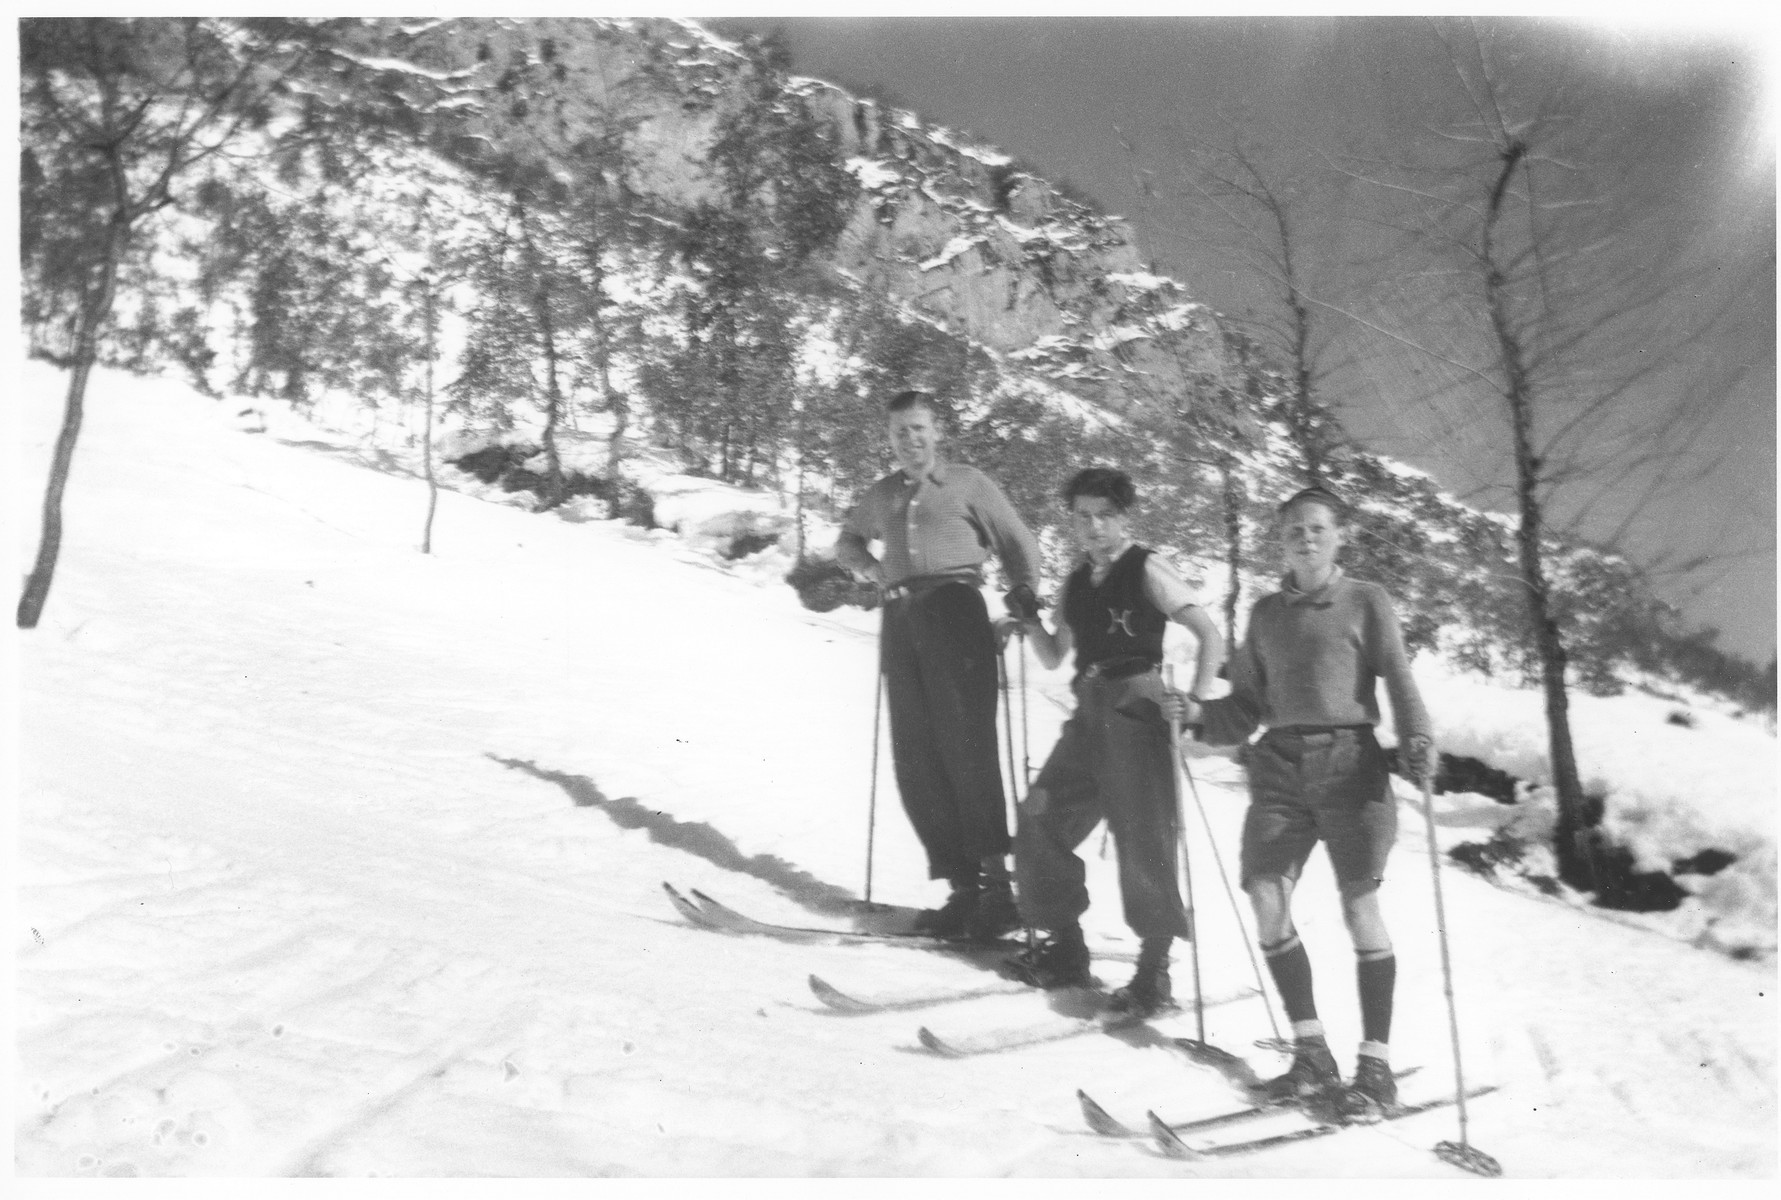 Jewish refugees ski near Valle Stura, Italy after escaping over the border from France.

Those pictured include Karl Tepper, Leopold Neuman, and Carl Roman.